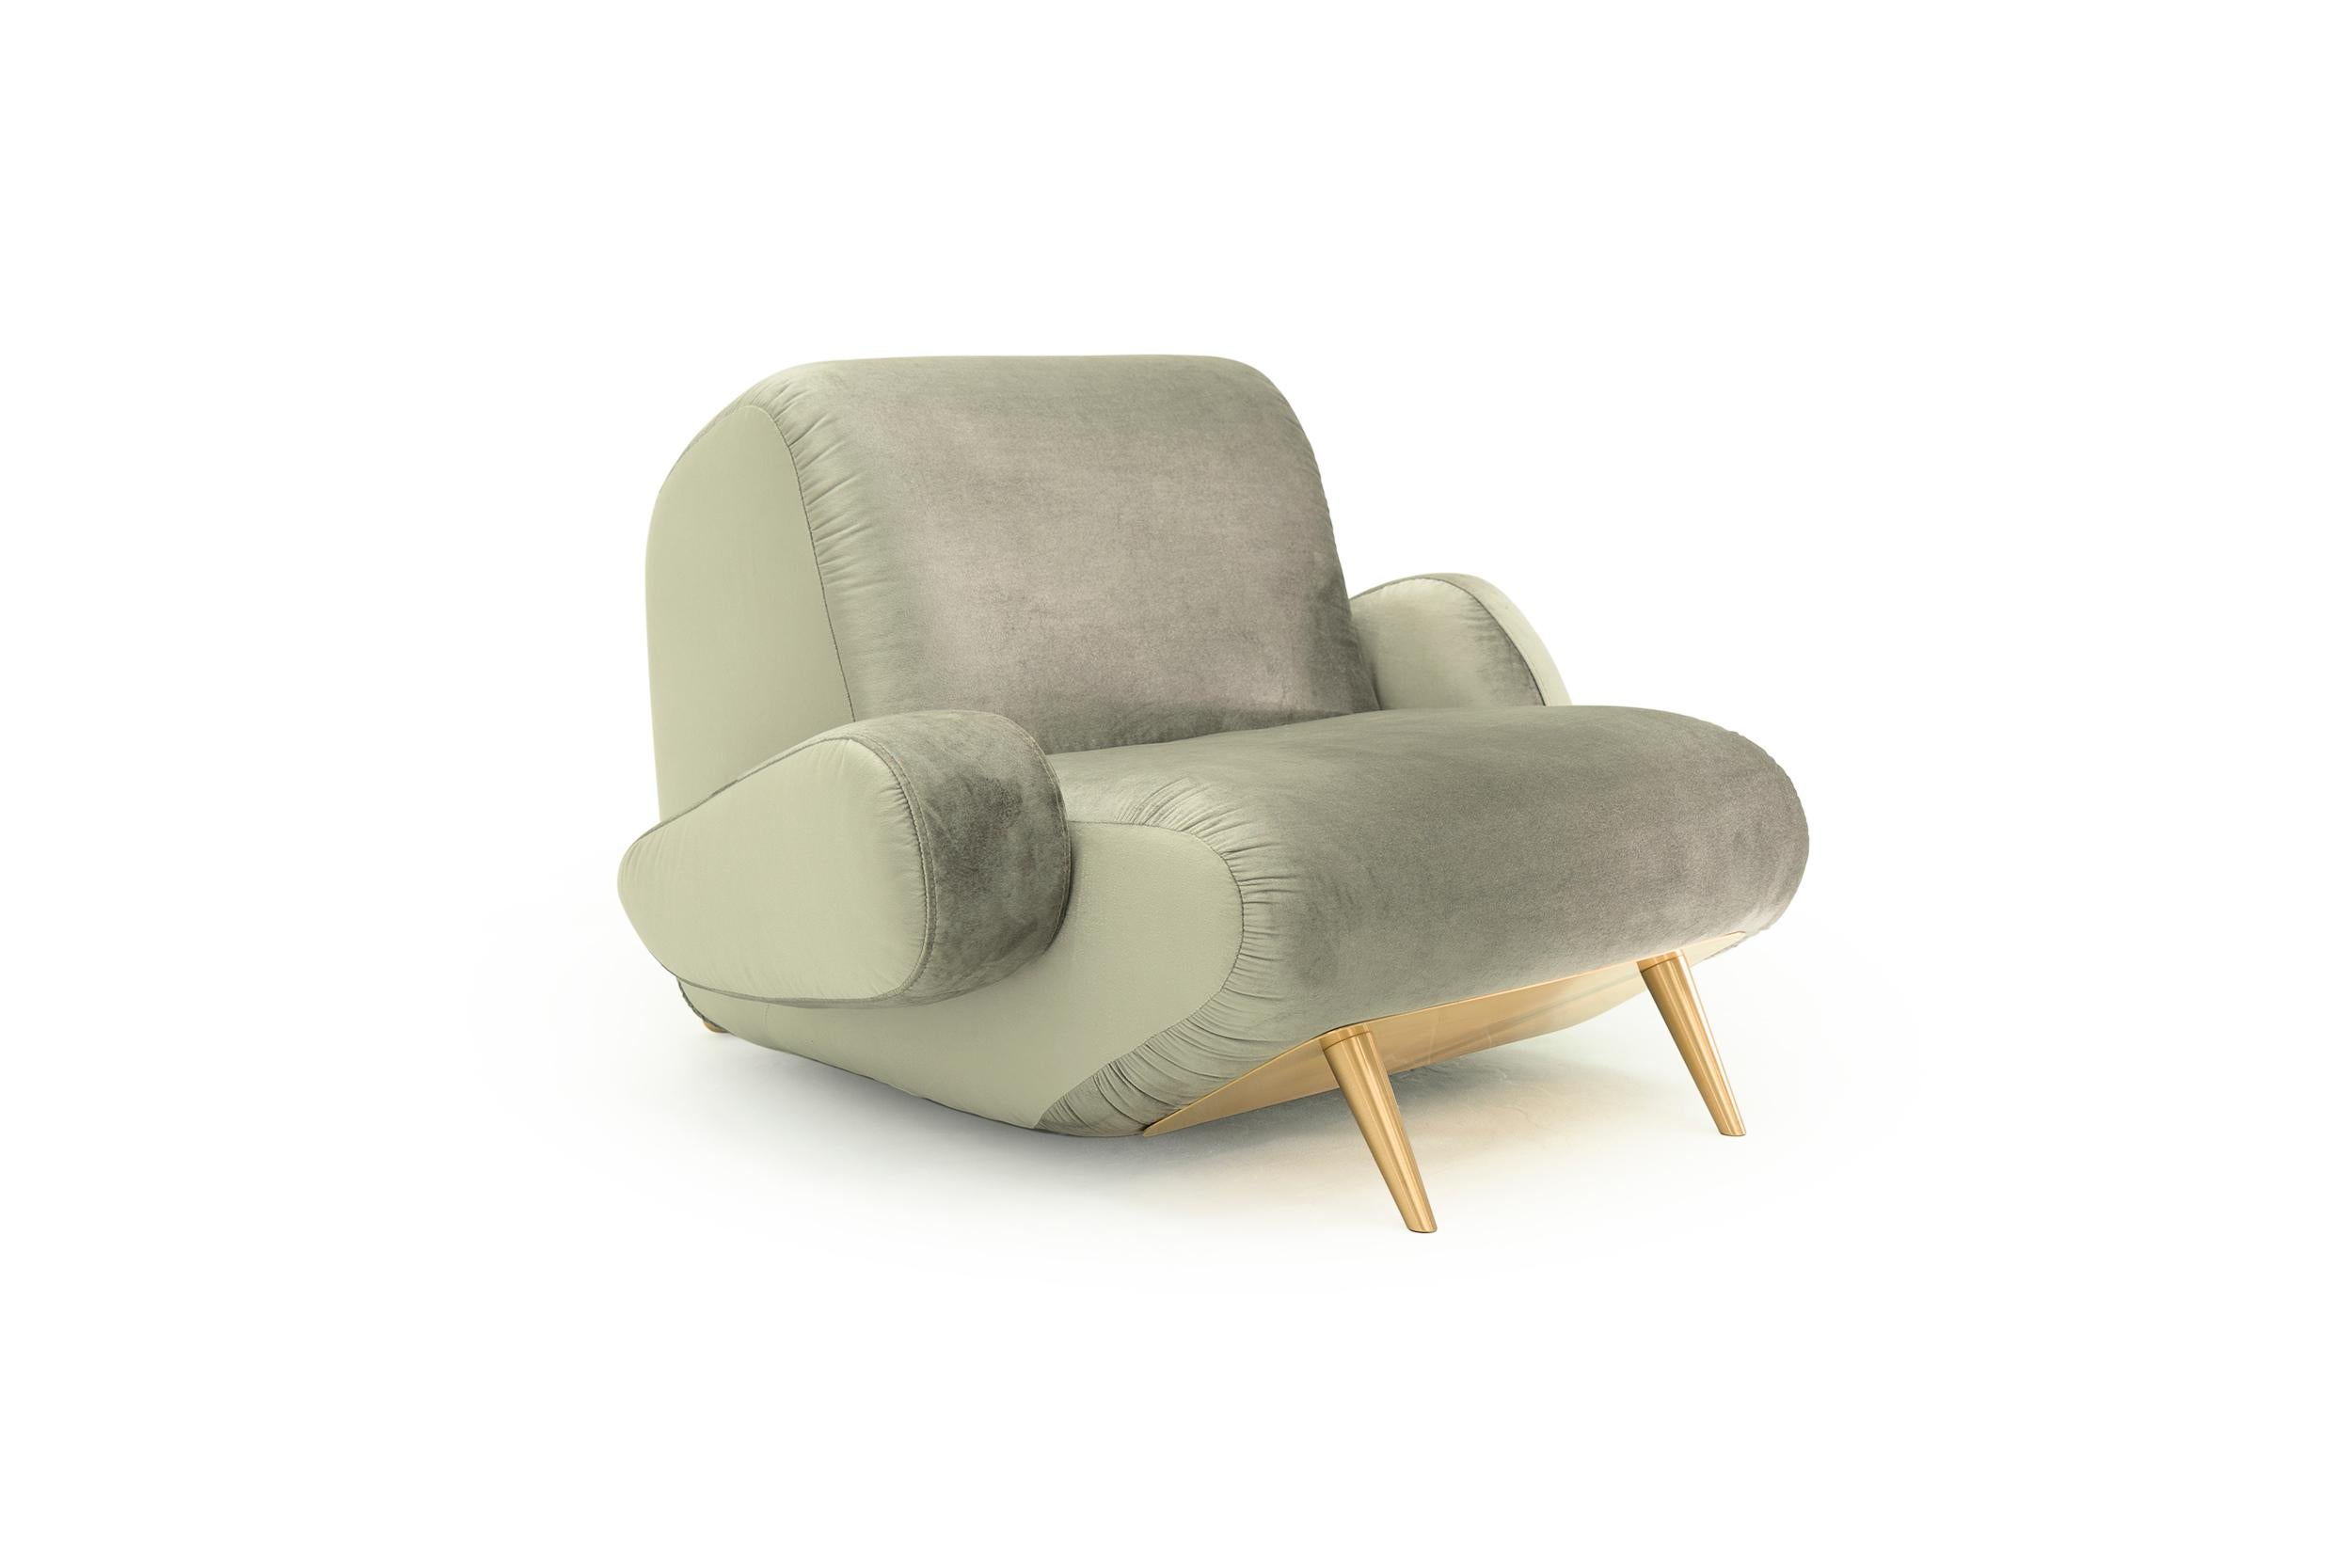 Inception armchair, 21st century large velvet and brass contemporary armchair

A pure and distinctive contour of the inception armchair is supported by self-sufficient asymmetrical details. From each its side one can observe diversity and balanced